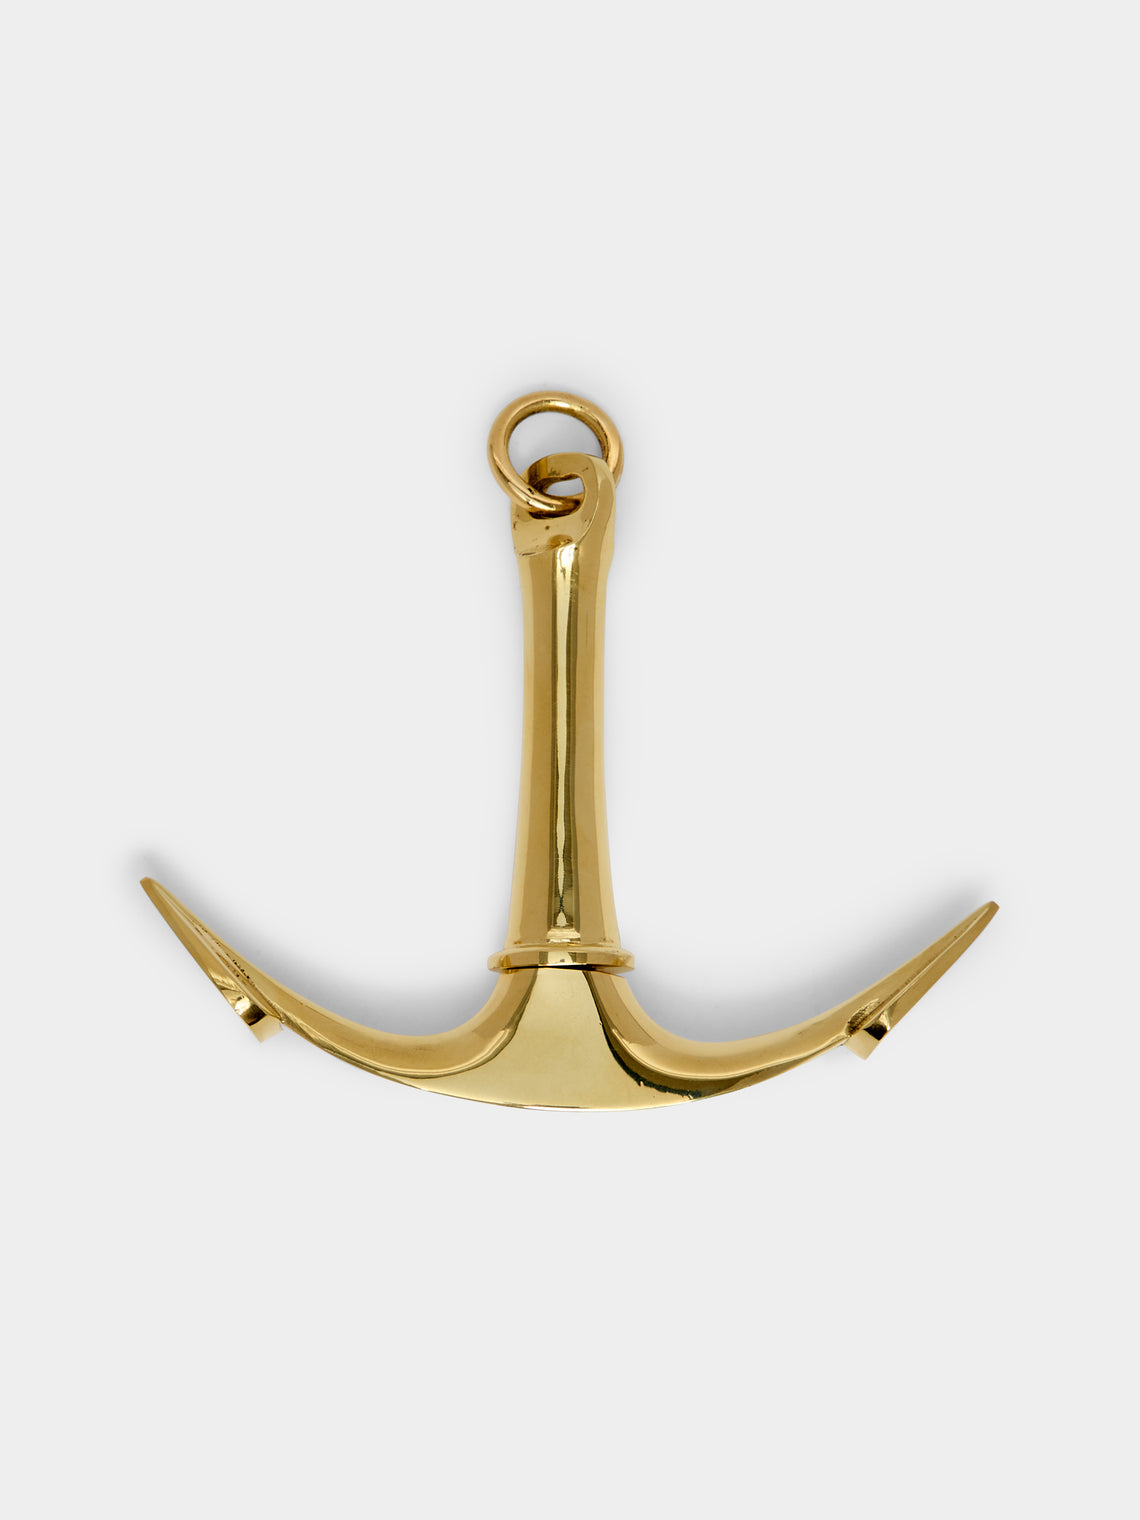 Carl Auböck - Anchor Brass Corkscrew and Paperweight -  - ABASK - 